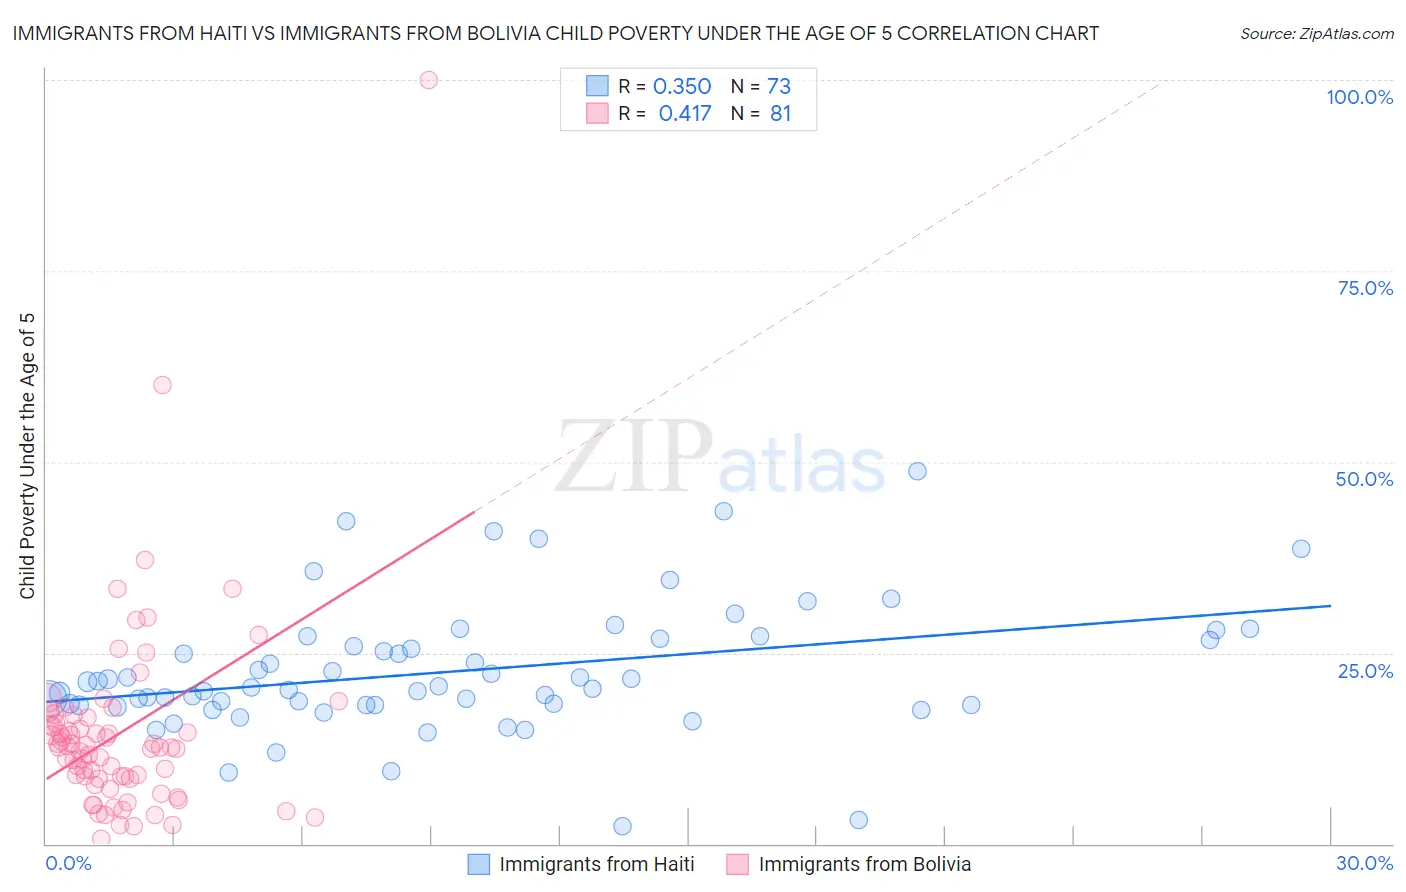 Immigrants from Haiti vs Immigrants from Bolivia Child Poverty Under the Age of 5